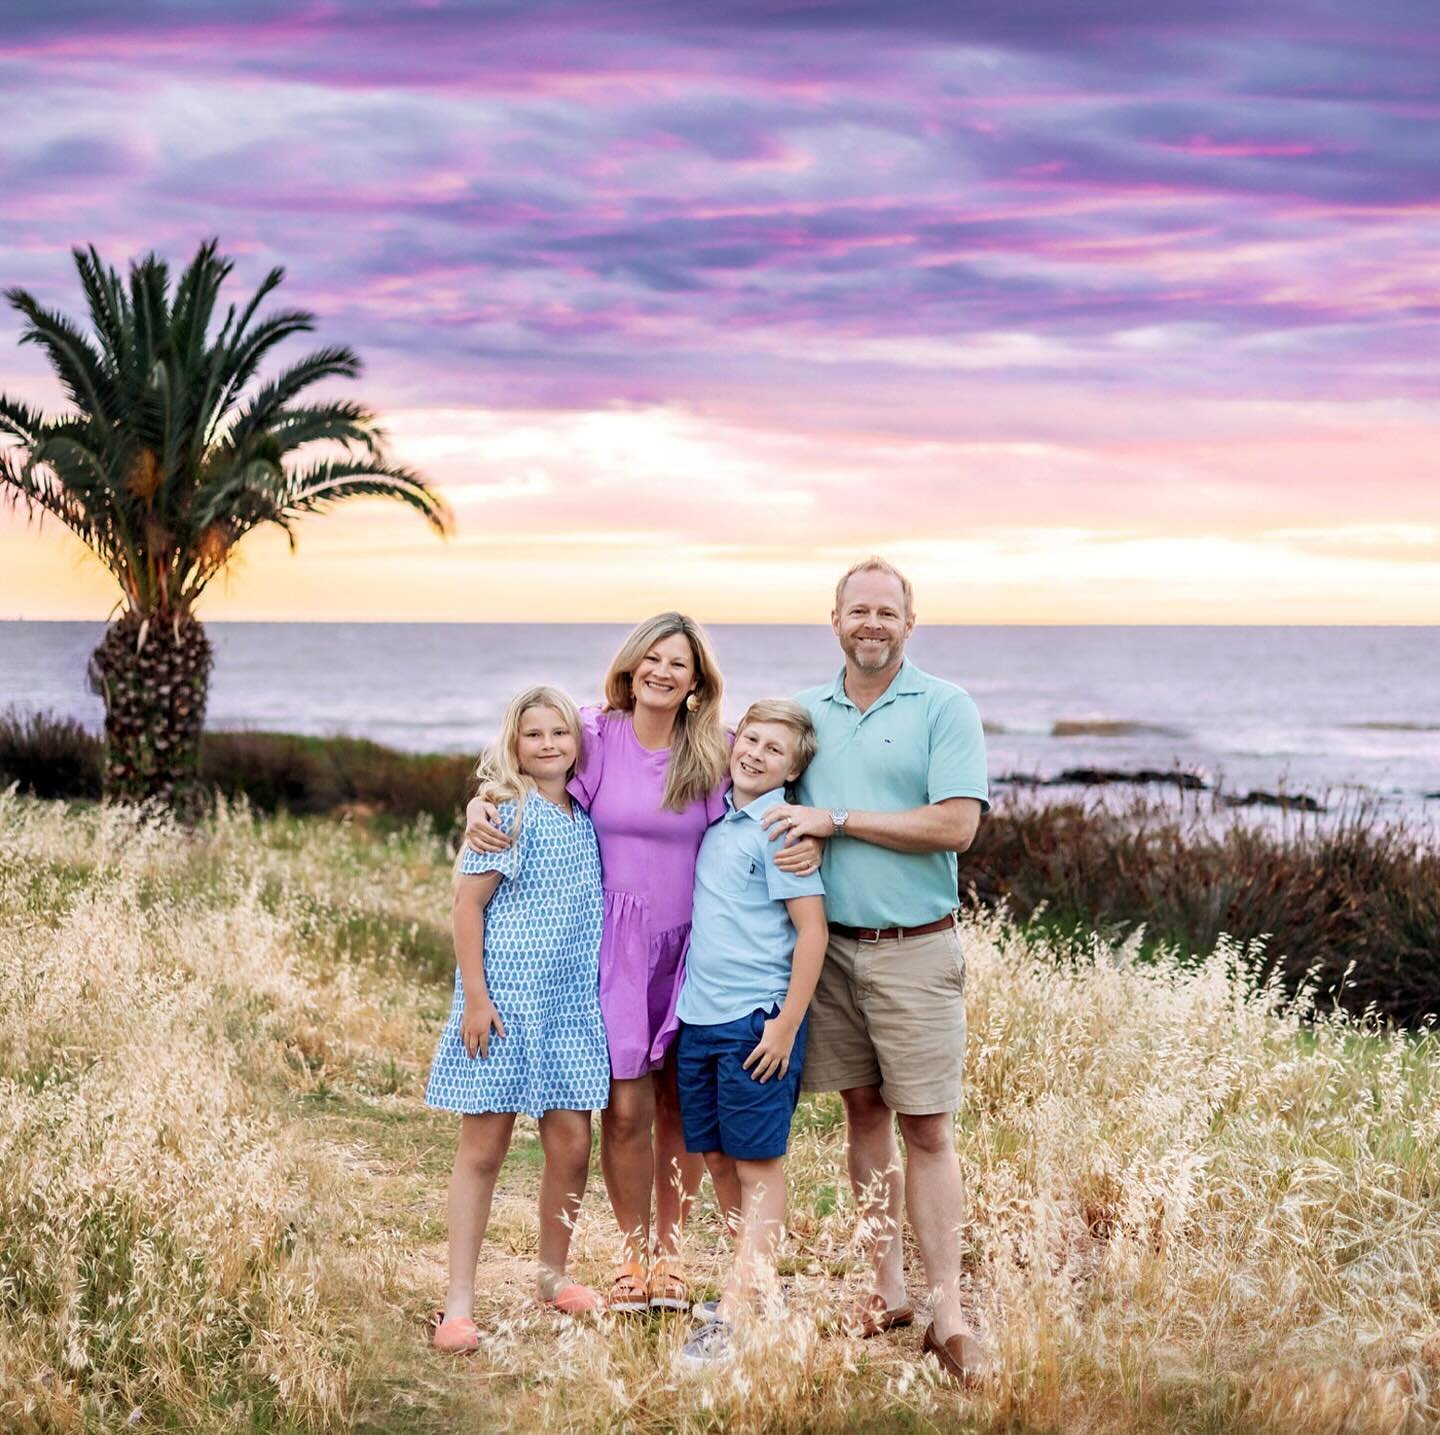 Five minutes of the most magical sunset ever!! Anddd the icing on the cake was these spring colors matched the sunset perfectly. I will forever love these coastal moments &lt;3 

#familyoffour #sunsetphotos #sunsetfamilyphotos #uruguay #uruguayphotos